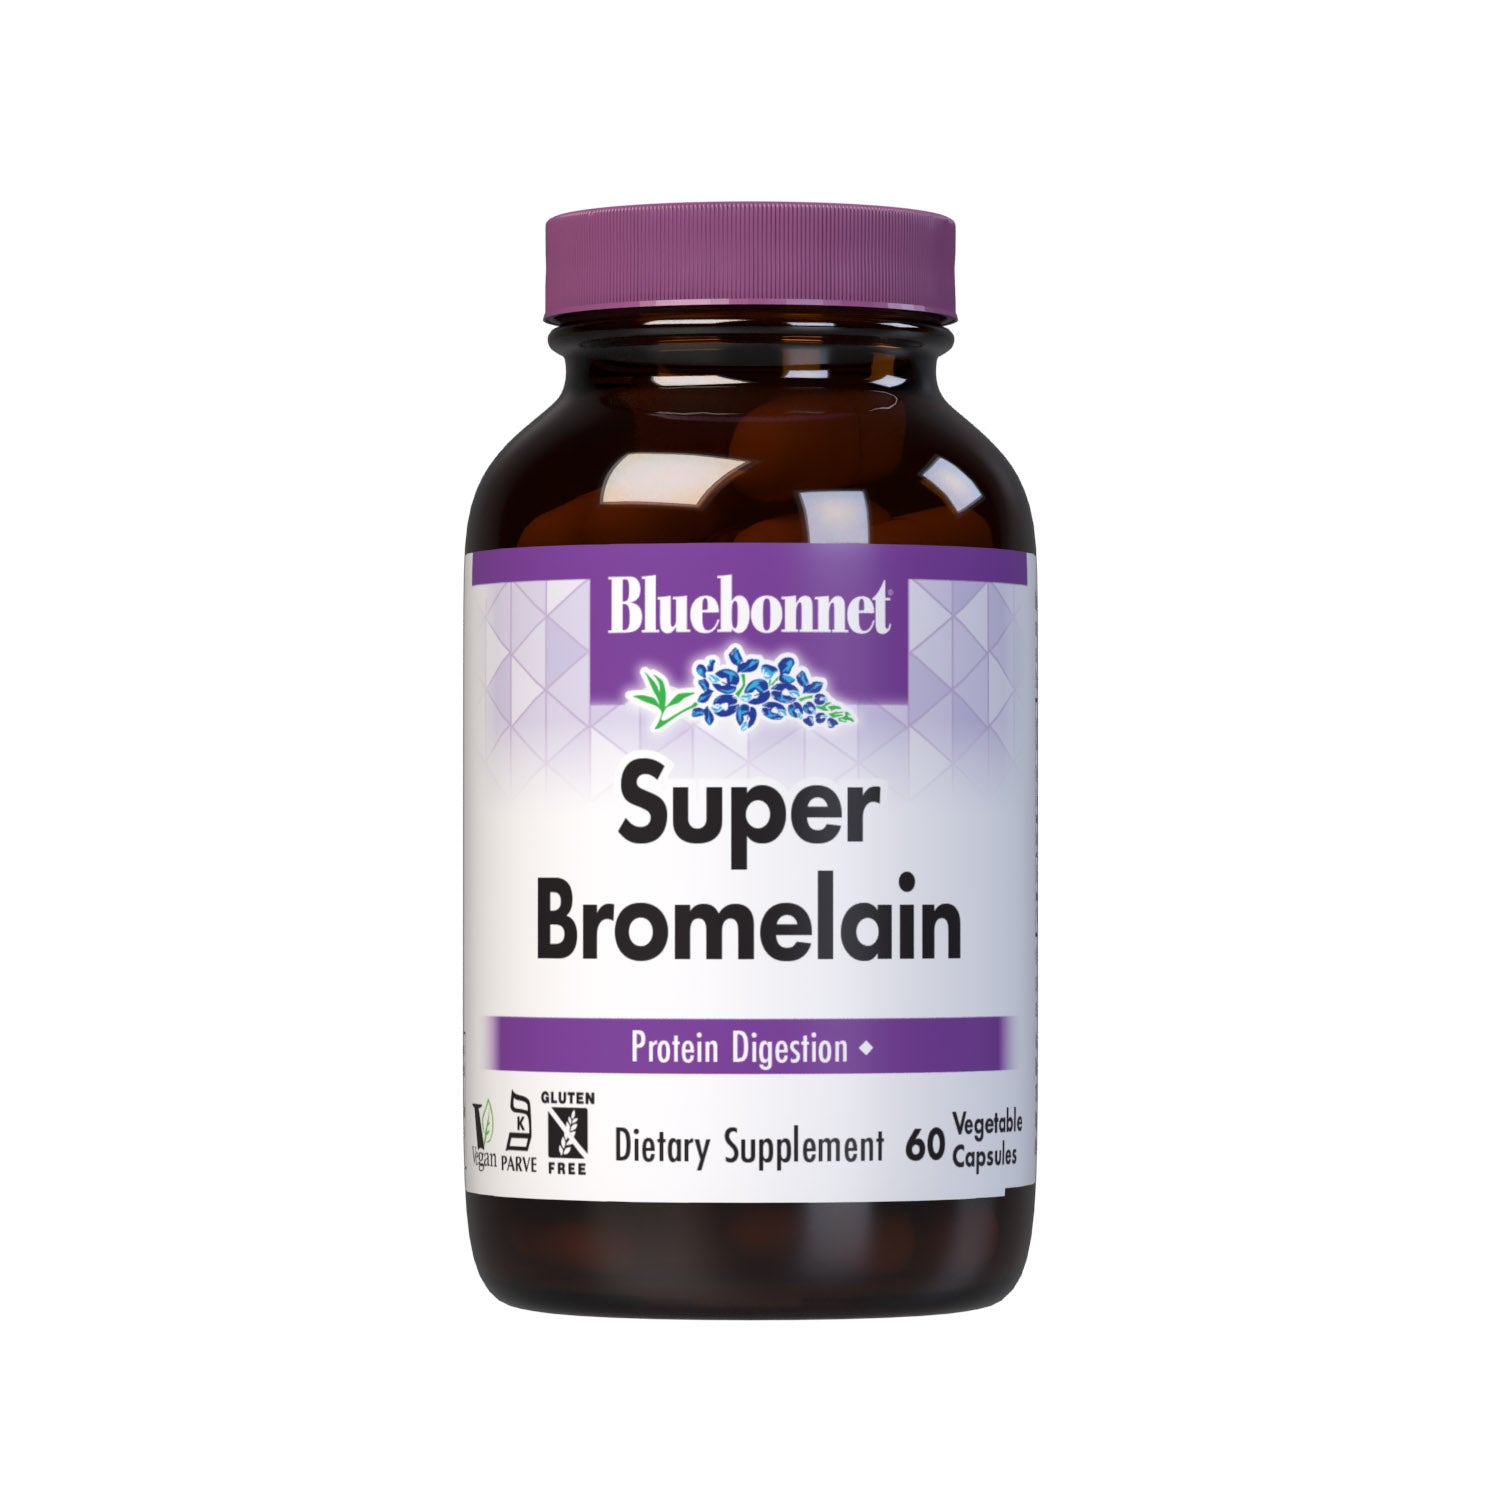 Bluebonnet’s Super Bromelain 500 mg 60 Vegetable Capsules are formulated with 2400 GDU/gm of bromelain from pineapple. Bromelain assists in the digestion of protein. #size_60 count